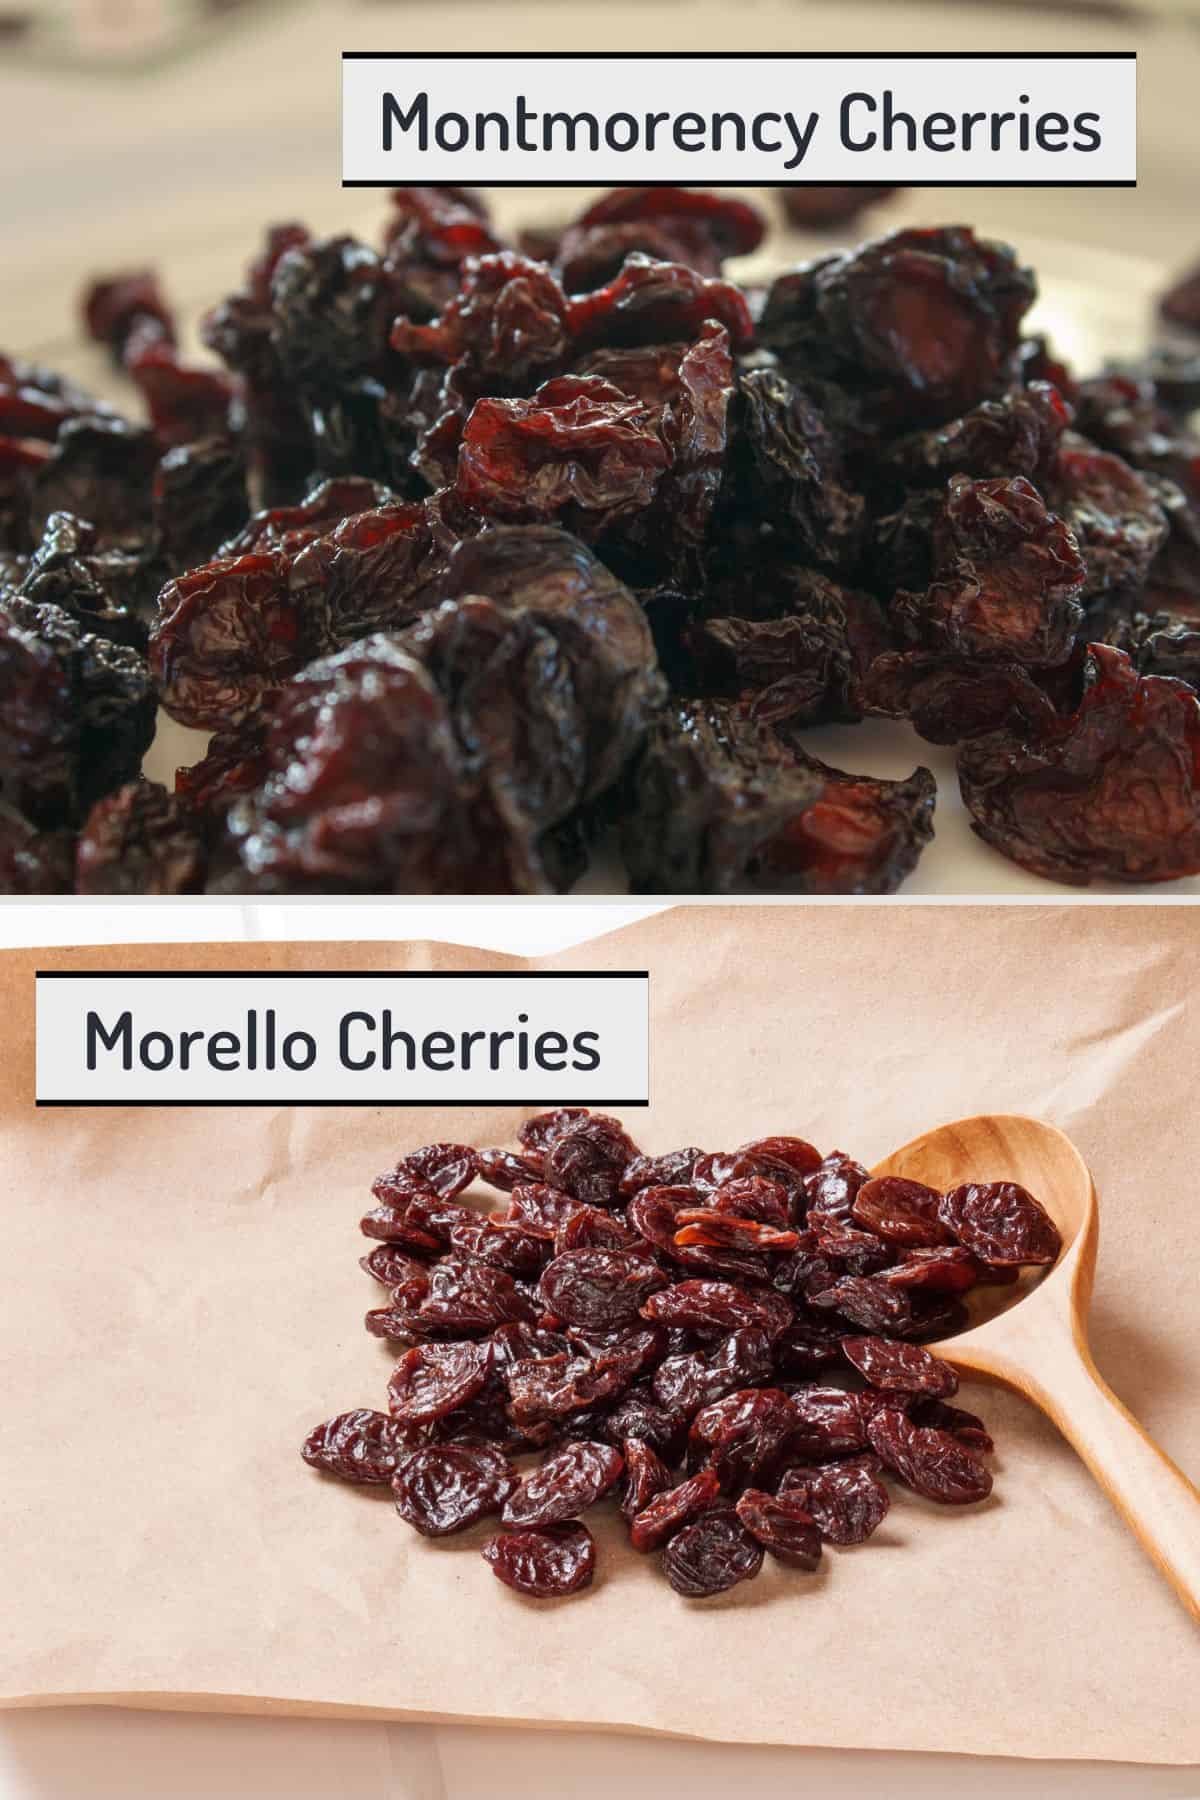 Two panel collage showing Montmorency and Morello cherries on top and bottom, with text overlay of titles.